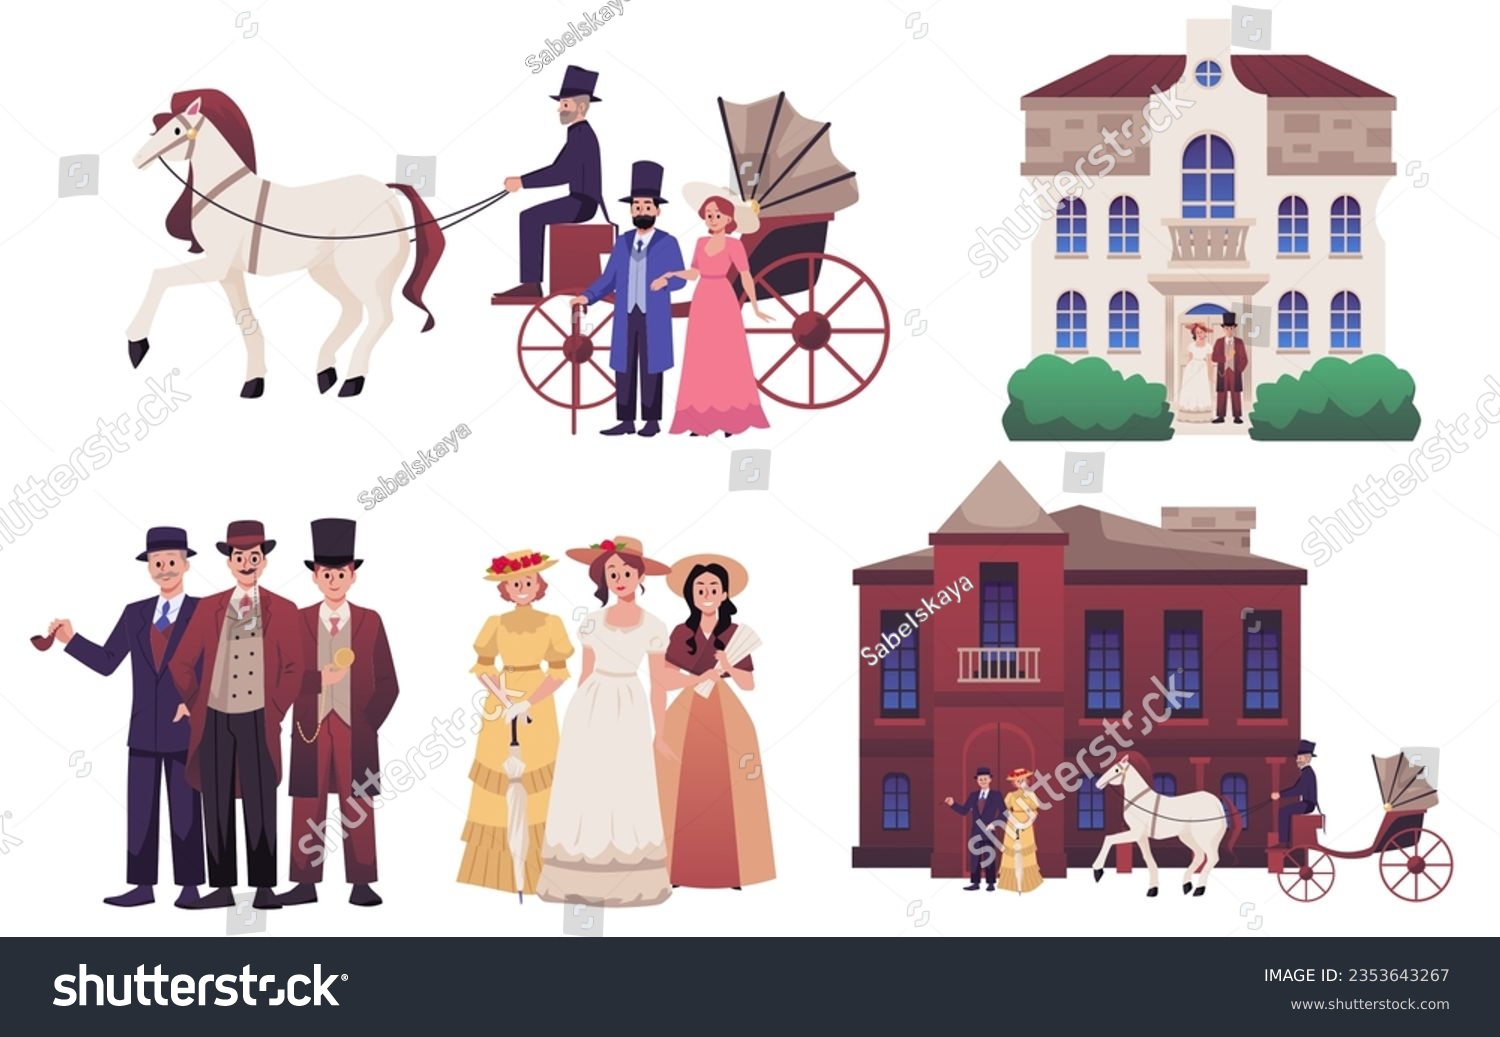 SVG of 18th 19th century old town victorian set of classic european architecture and people. Vector illustrations of men, women in historical fashion costumes. Buildings, astles, carriage with white horse svg